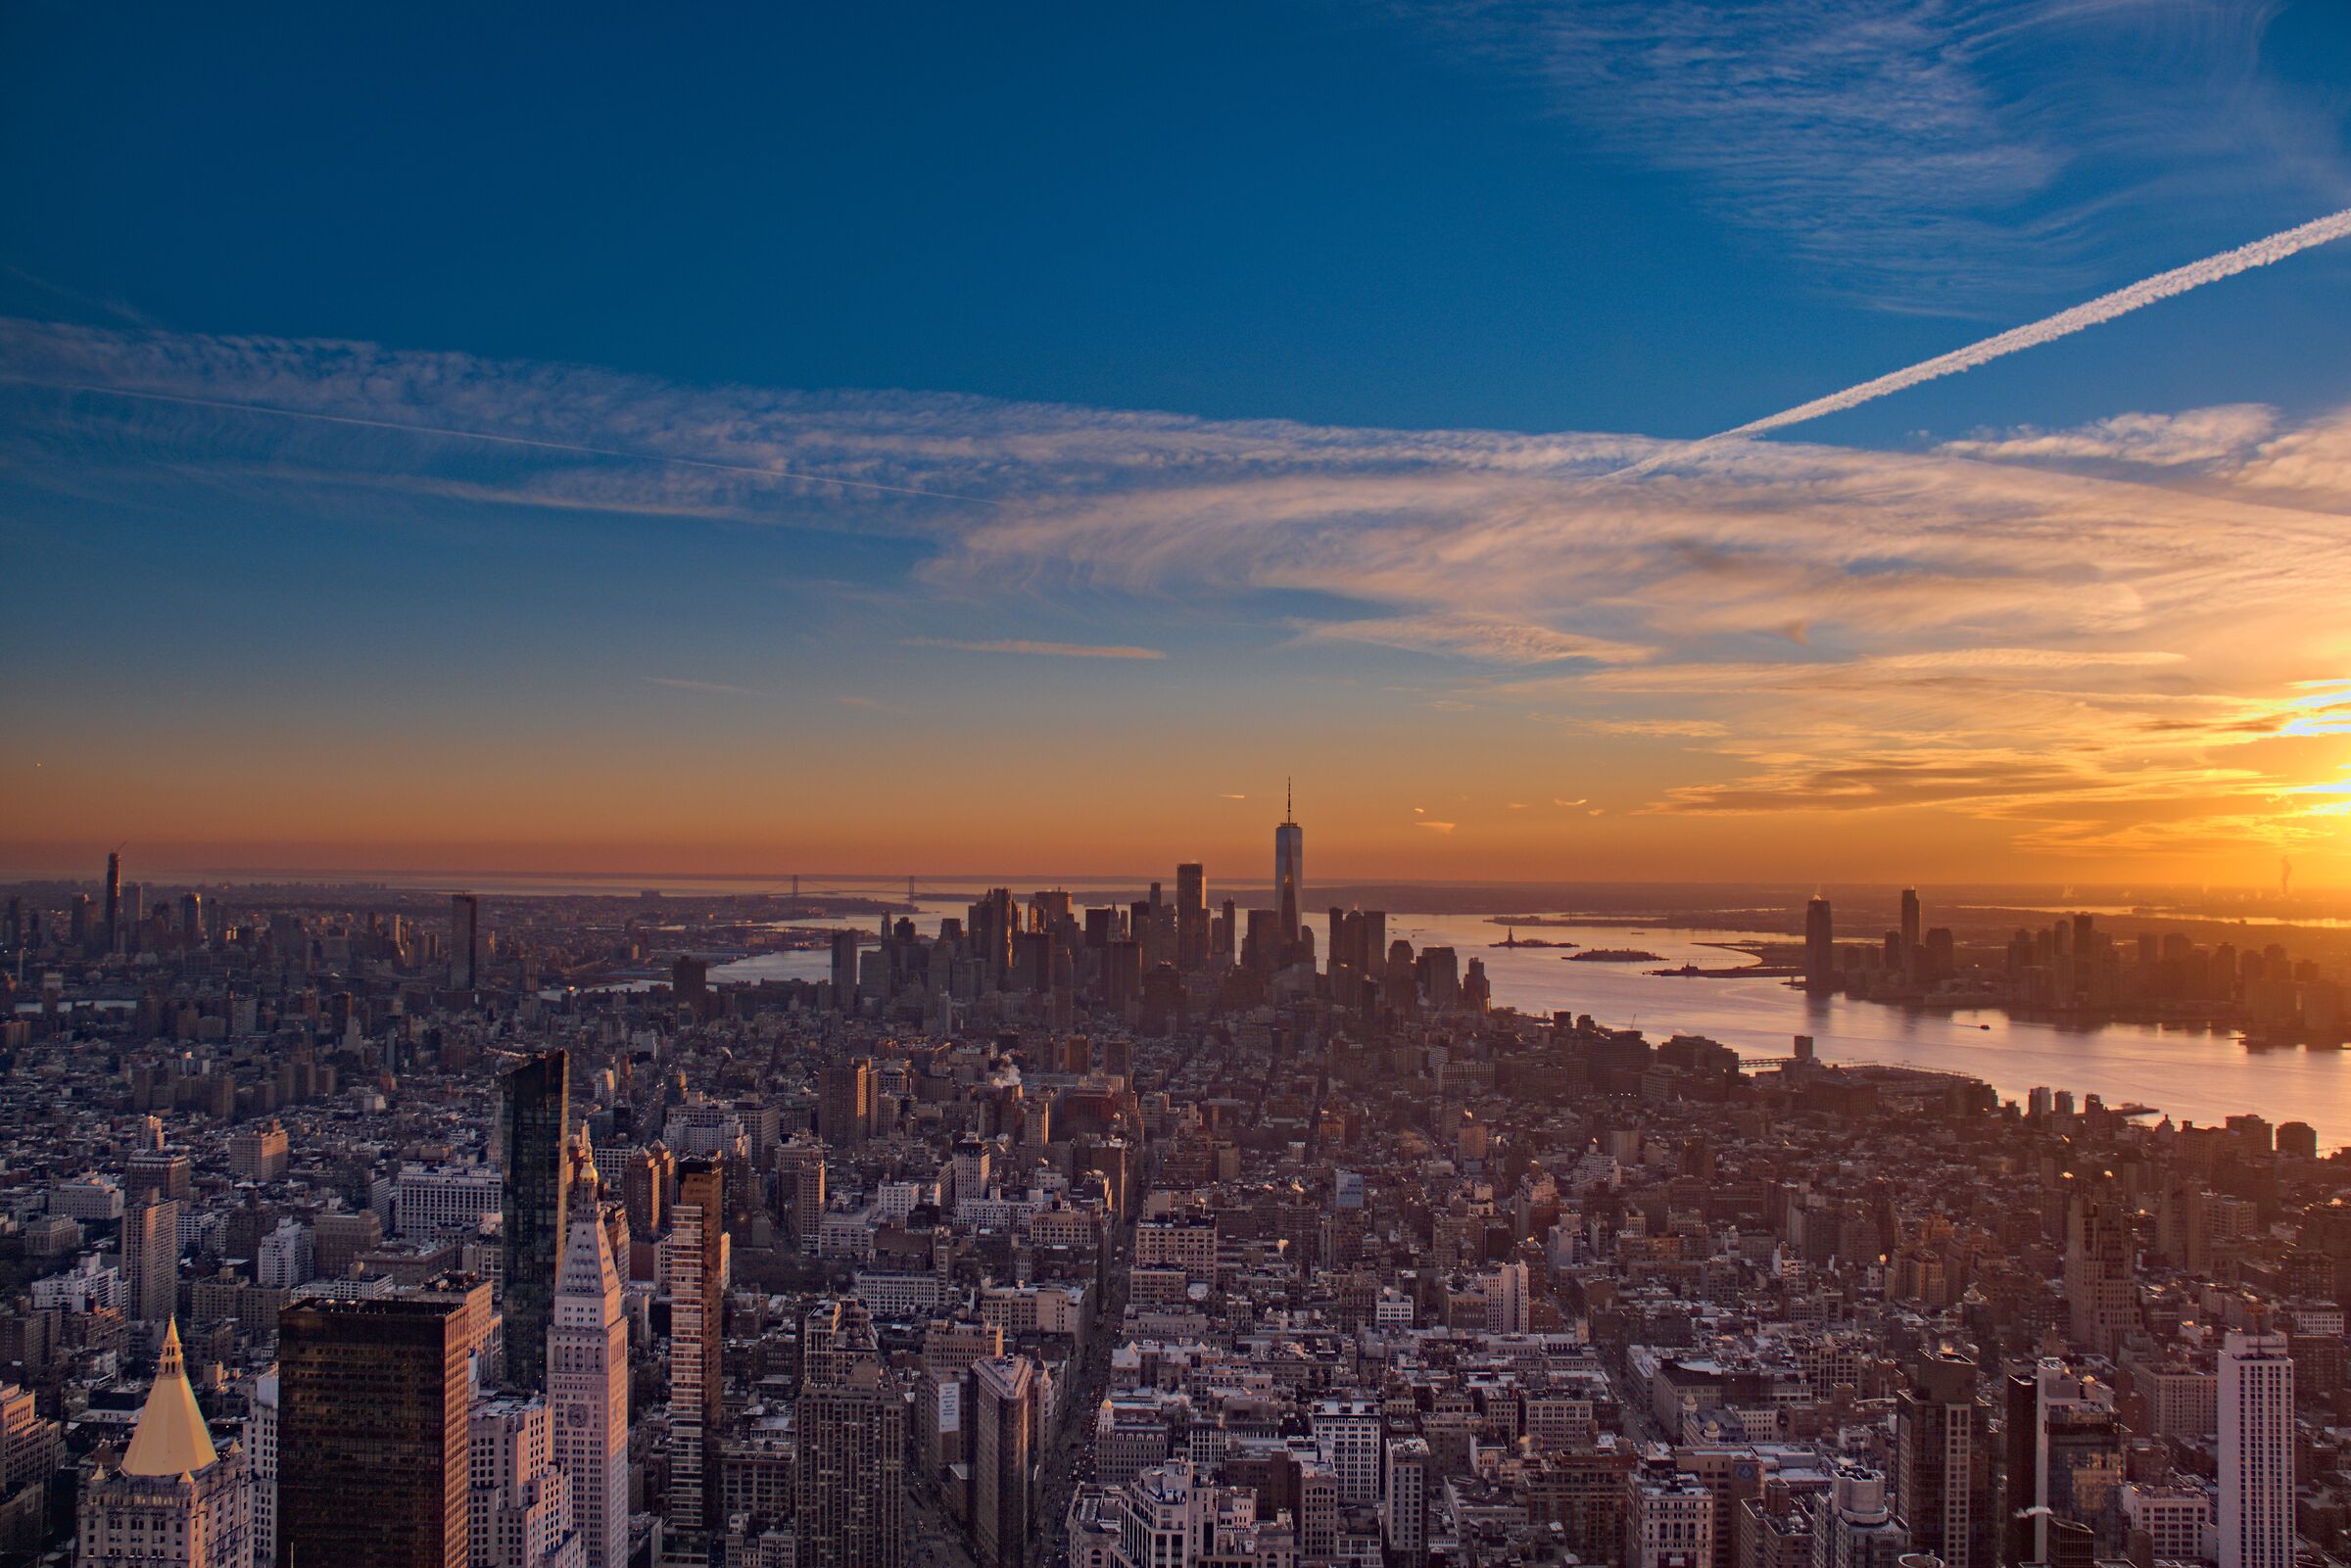 Sunset over the Big Apple...